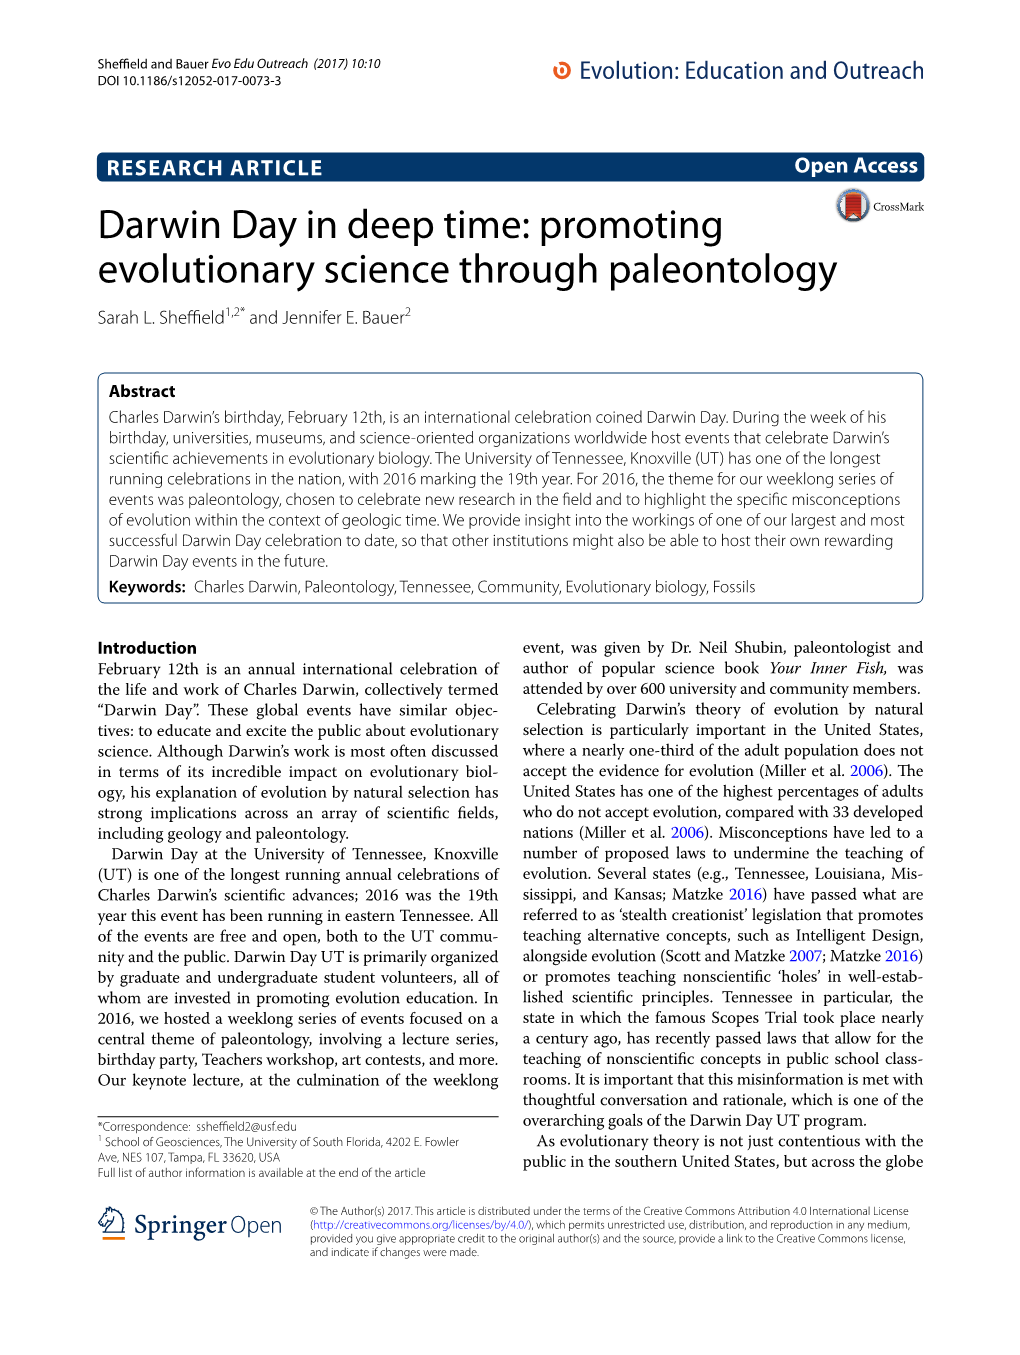 Darwin Day in Deep Time: Promoting Evolutionary Science Through Paleontology Sarah L